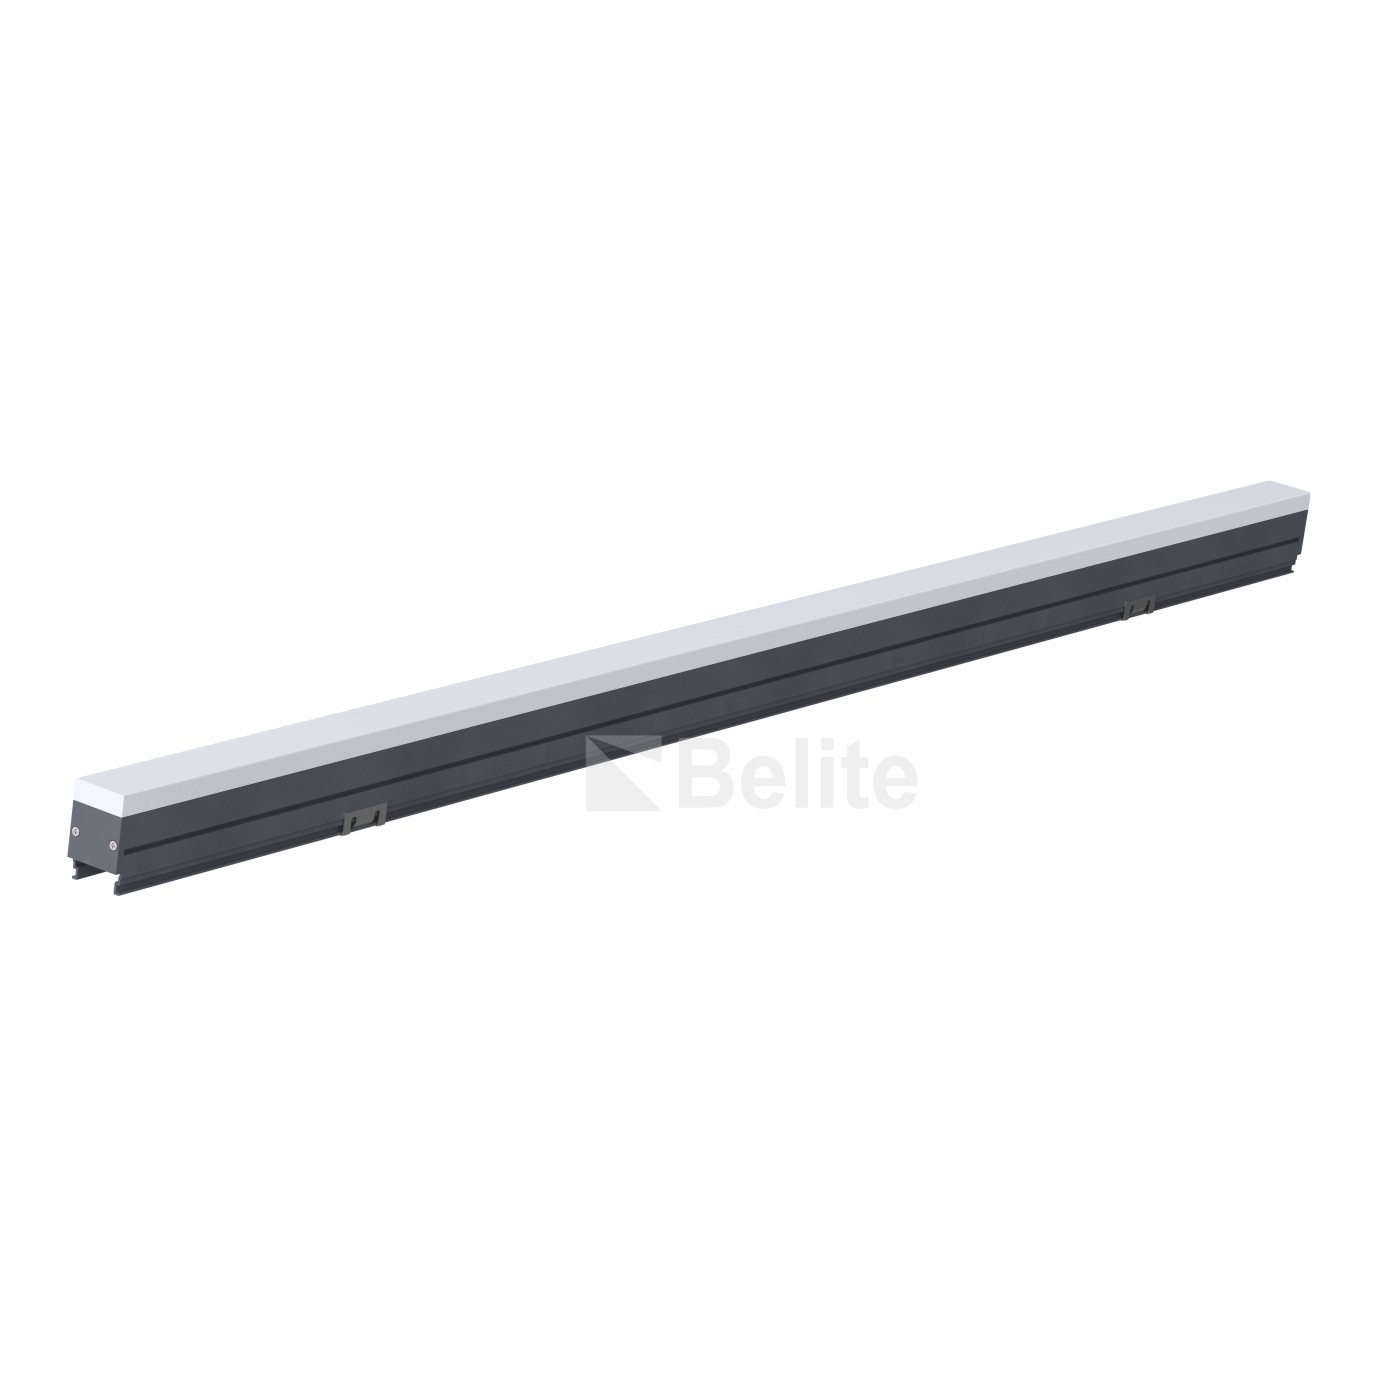 IP66 12W 1M 0.5M Diffuse LED Linear WallWasher Light For Building Facade Application